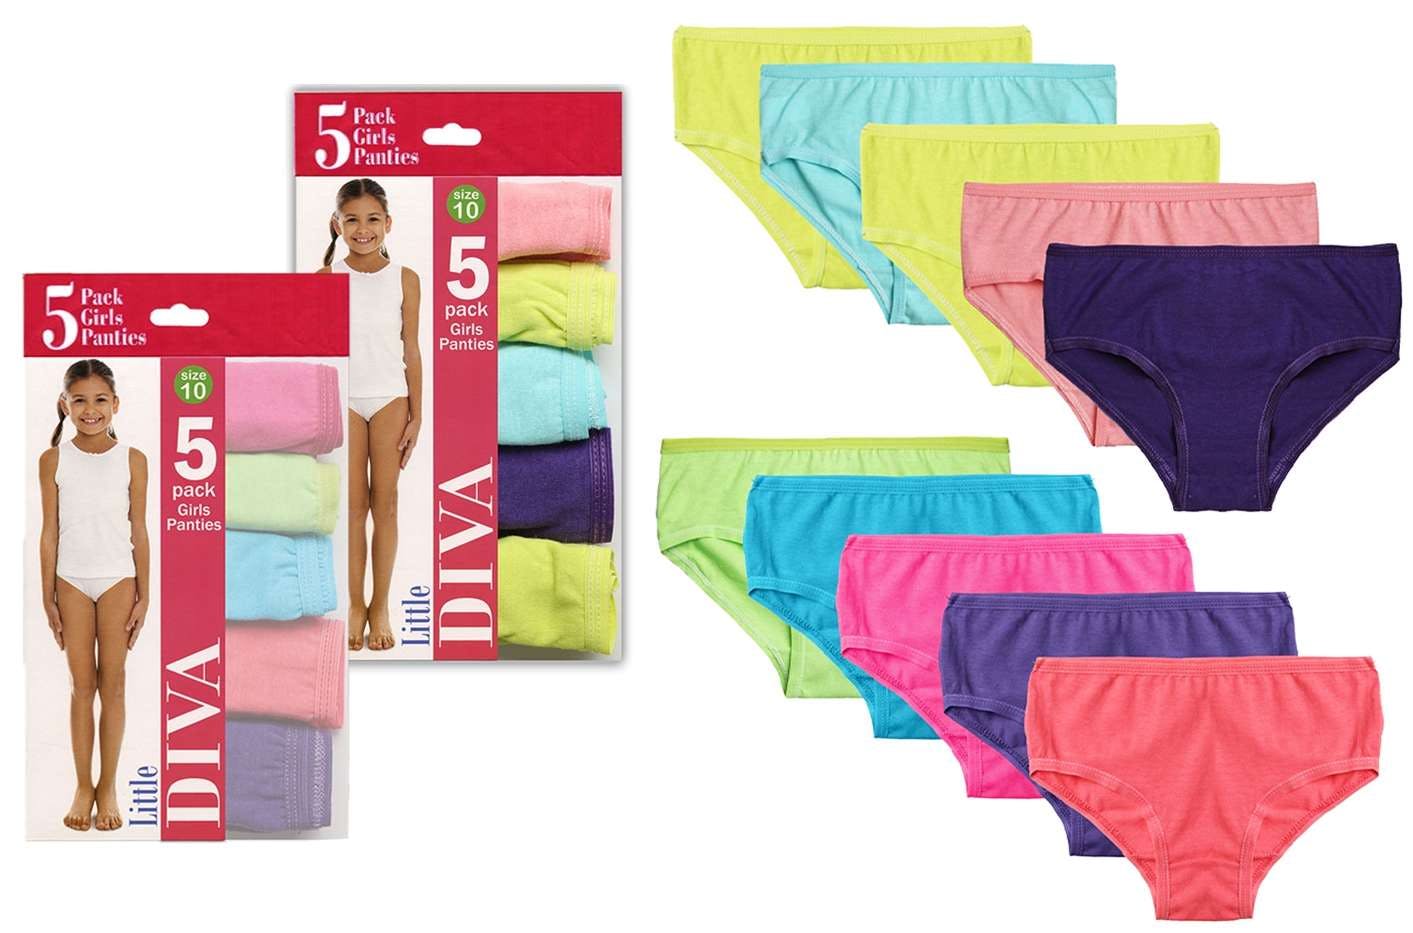 Fruit of the Loom Toddler Girl Brief Underwear, 7 Pack, Sizes 2T-5T